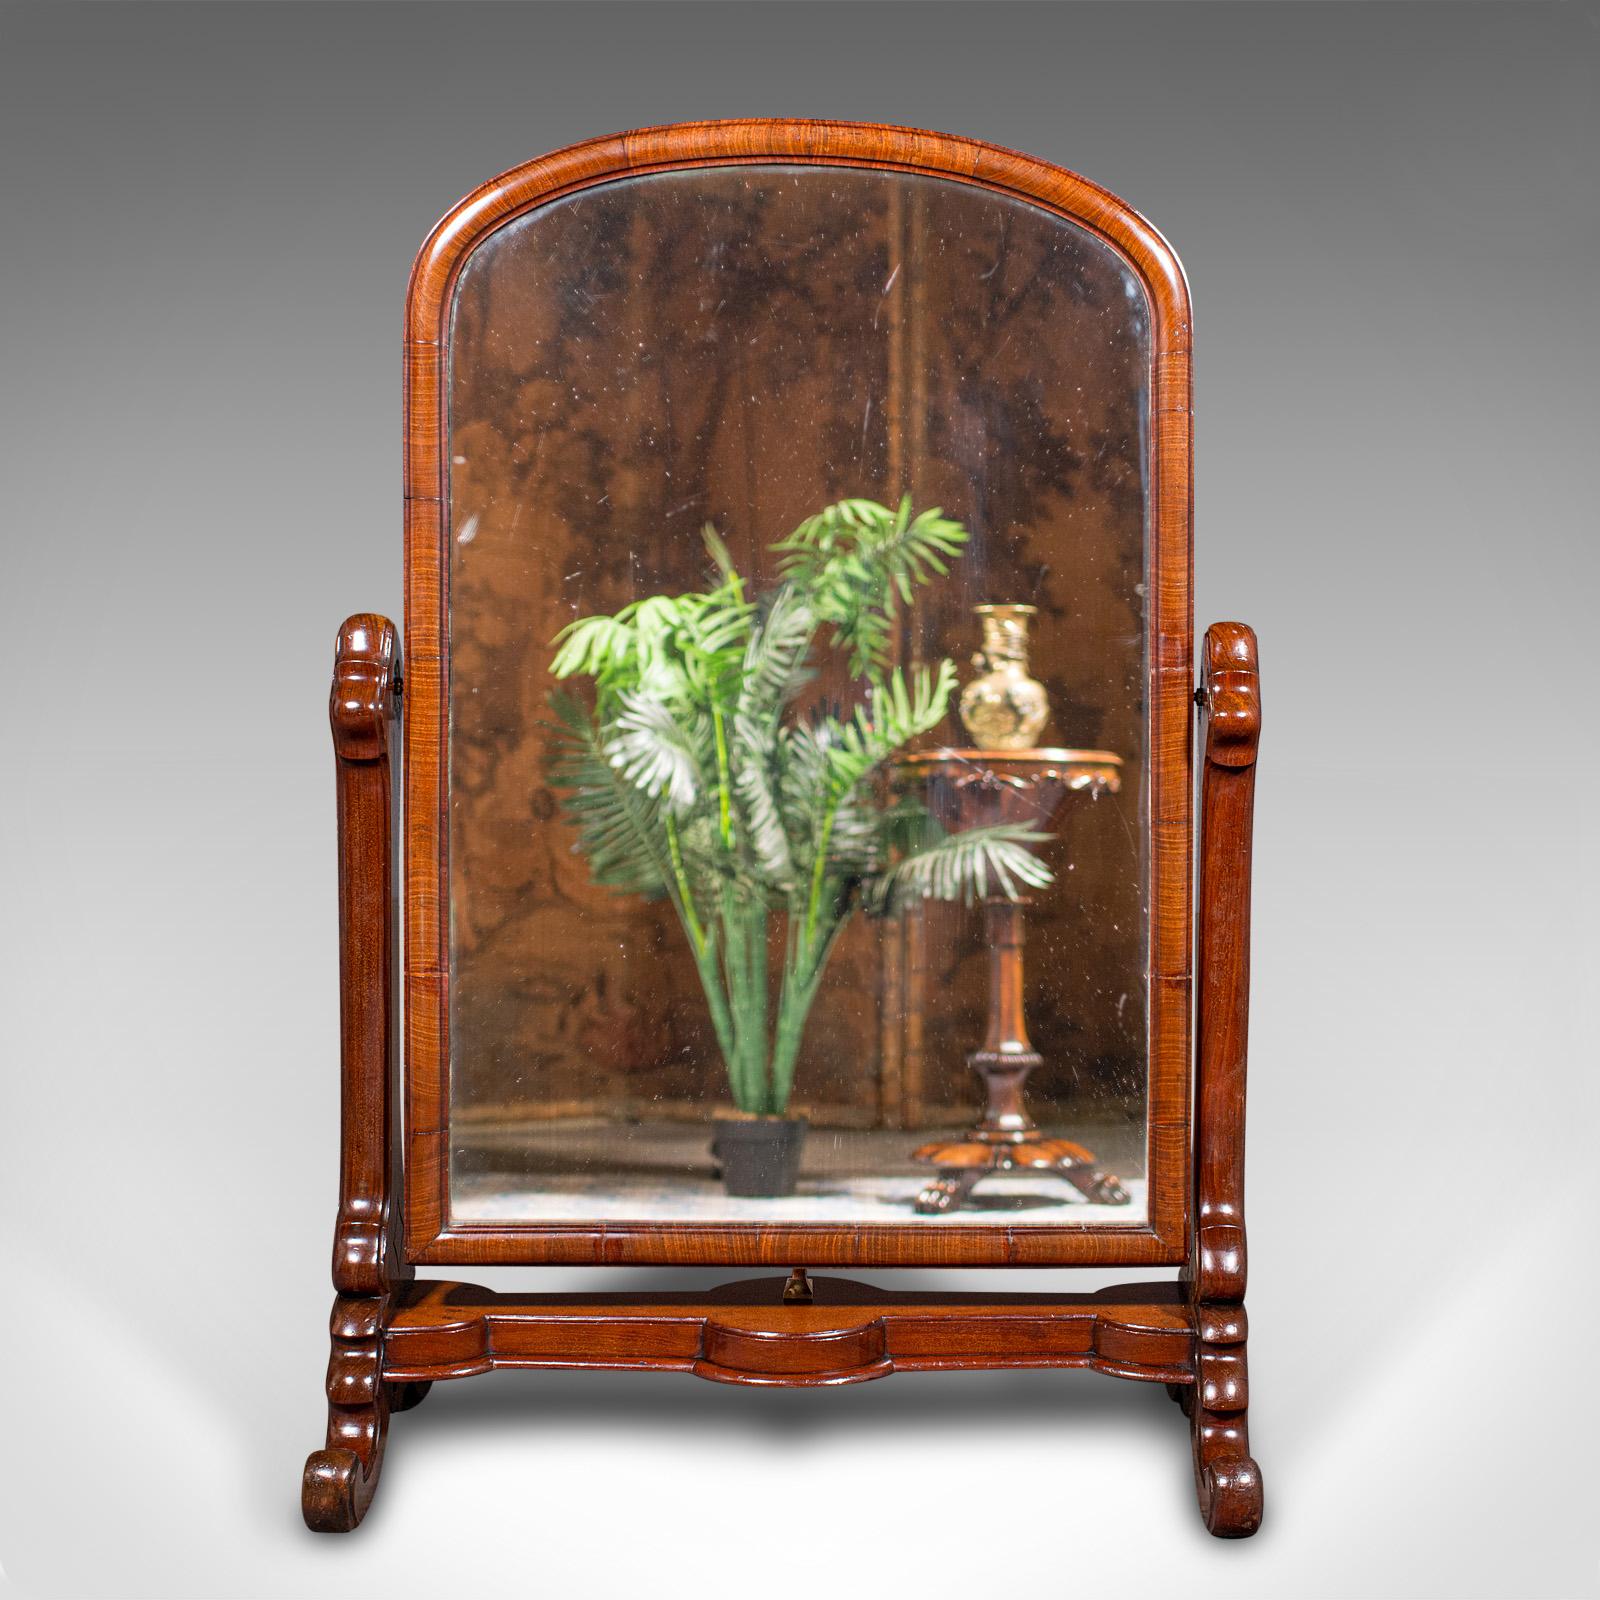 This is an antique boot maker's mirror. An English, mahogany and glass cheval mirror, dating to the early Victorian period, circa 1840.

Fascinatingly low profile, ideal for retail use or upon a large dressing table
Displays a desirable aged patina